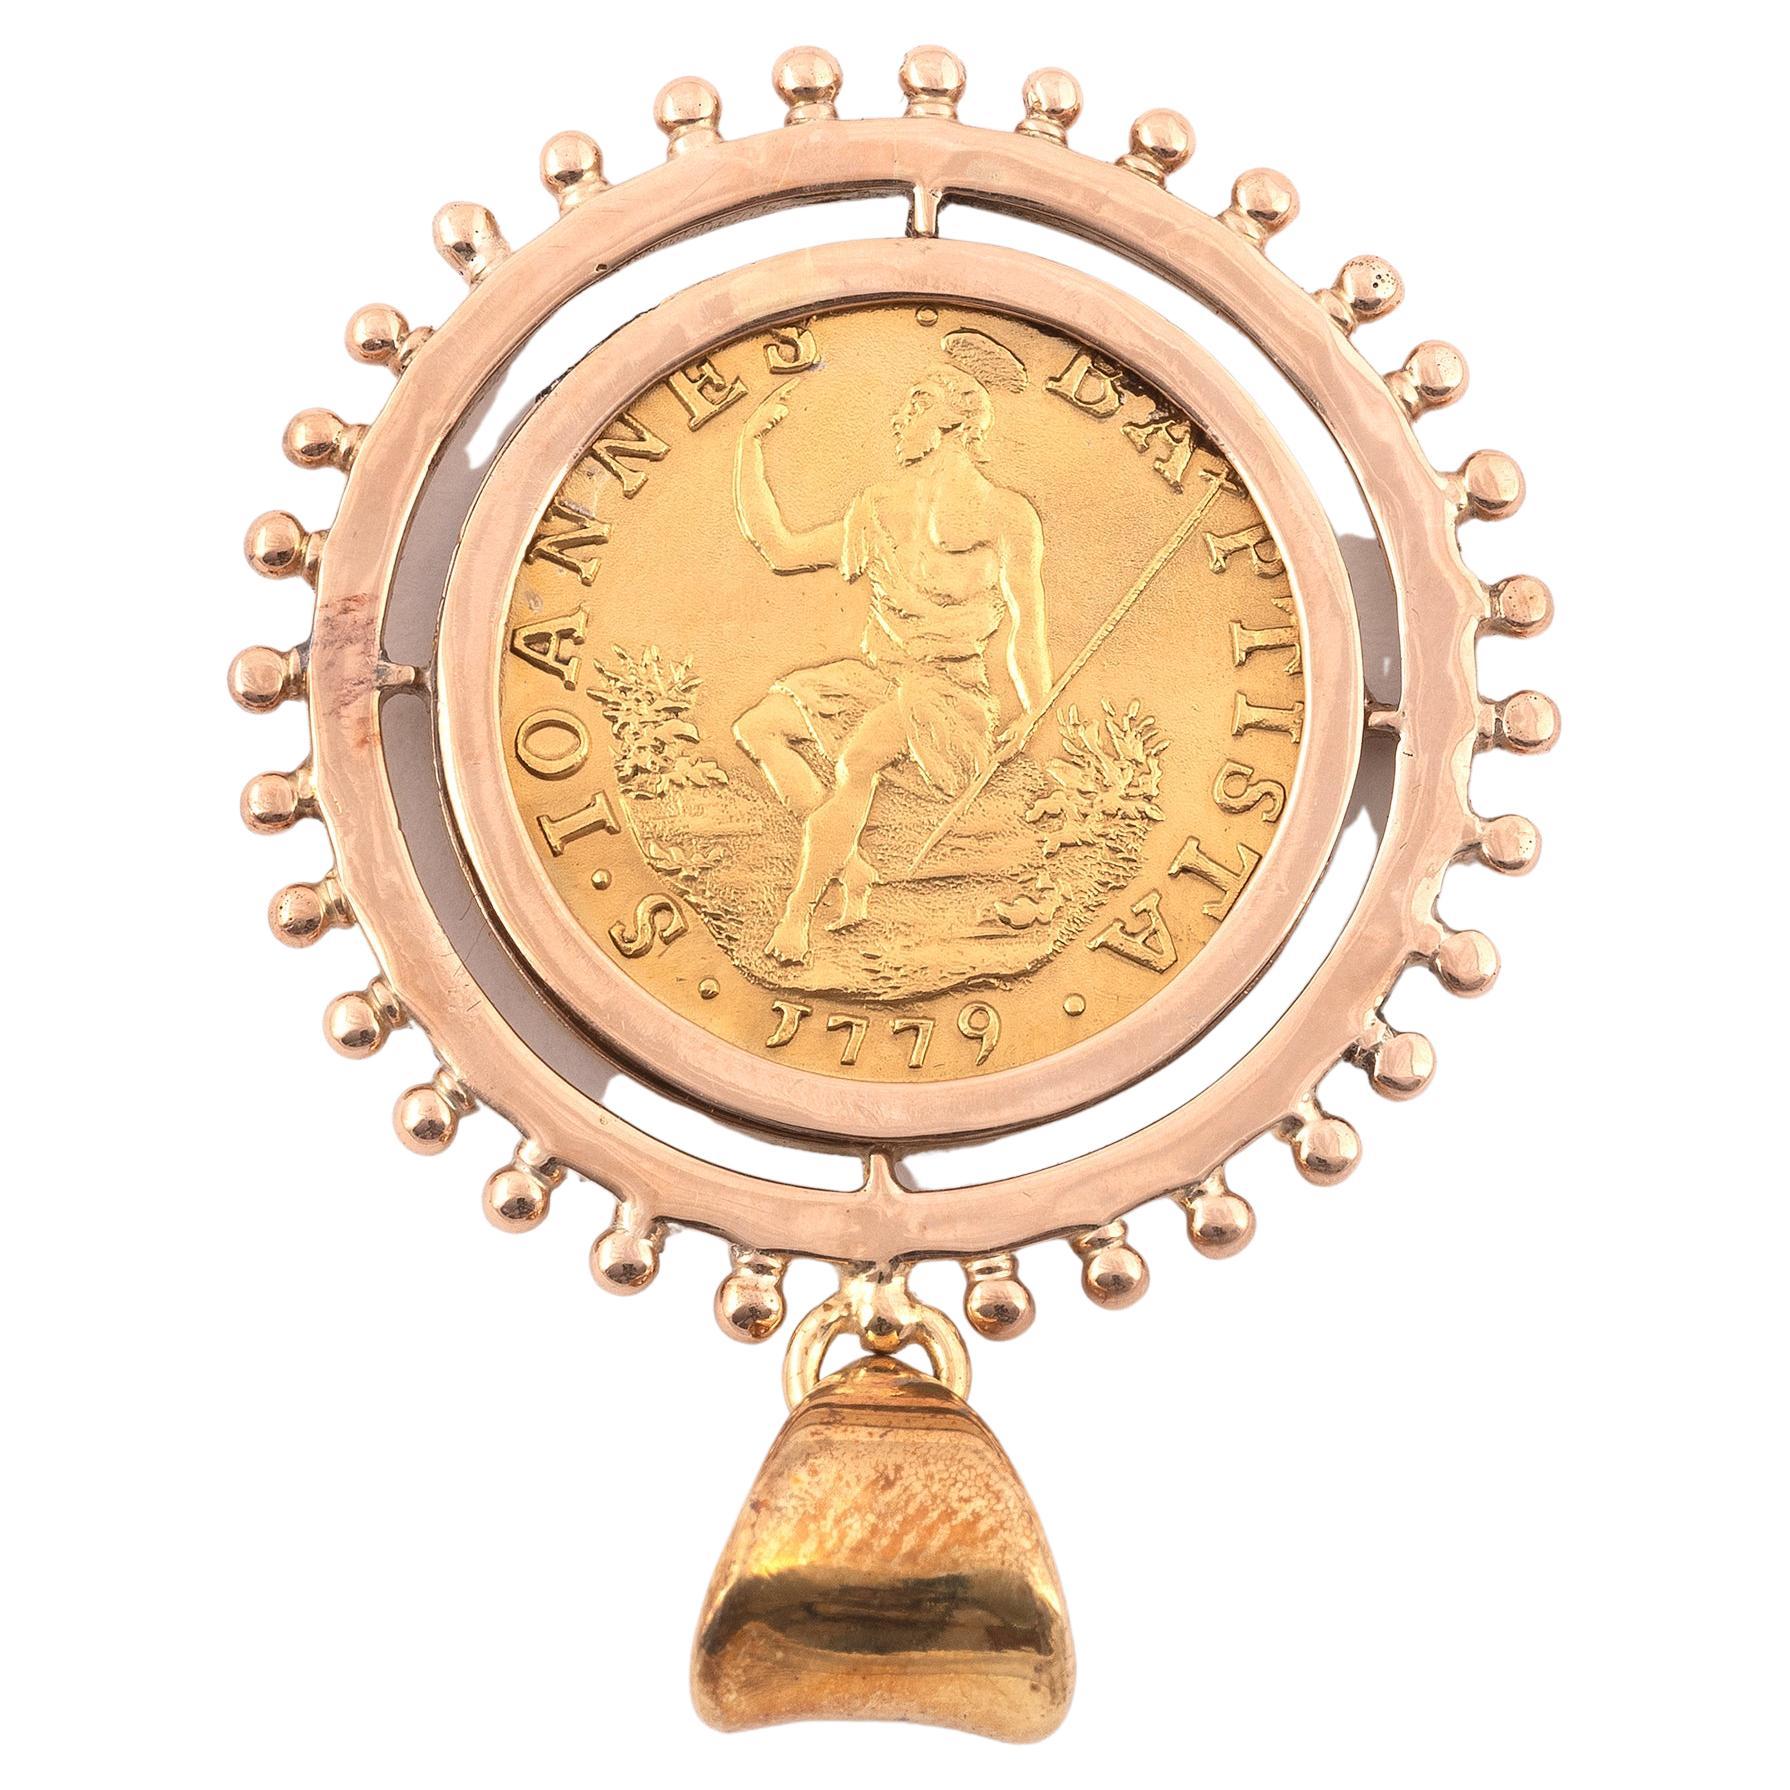 Antique gold fiorino coin dated 1779 with the setting gold pendant.
Diameter : 3,2cm
Weight: 8.52gr.